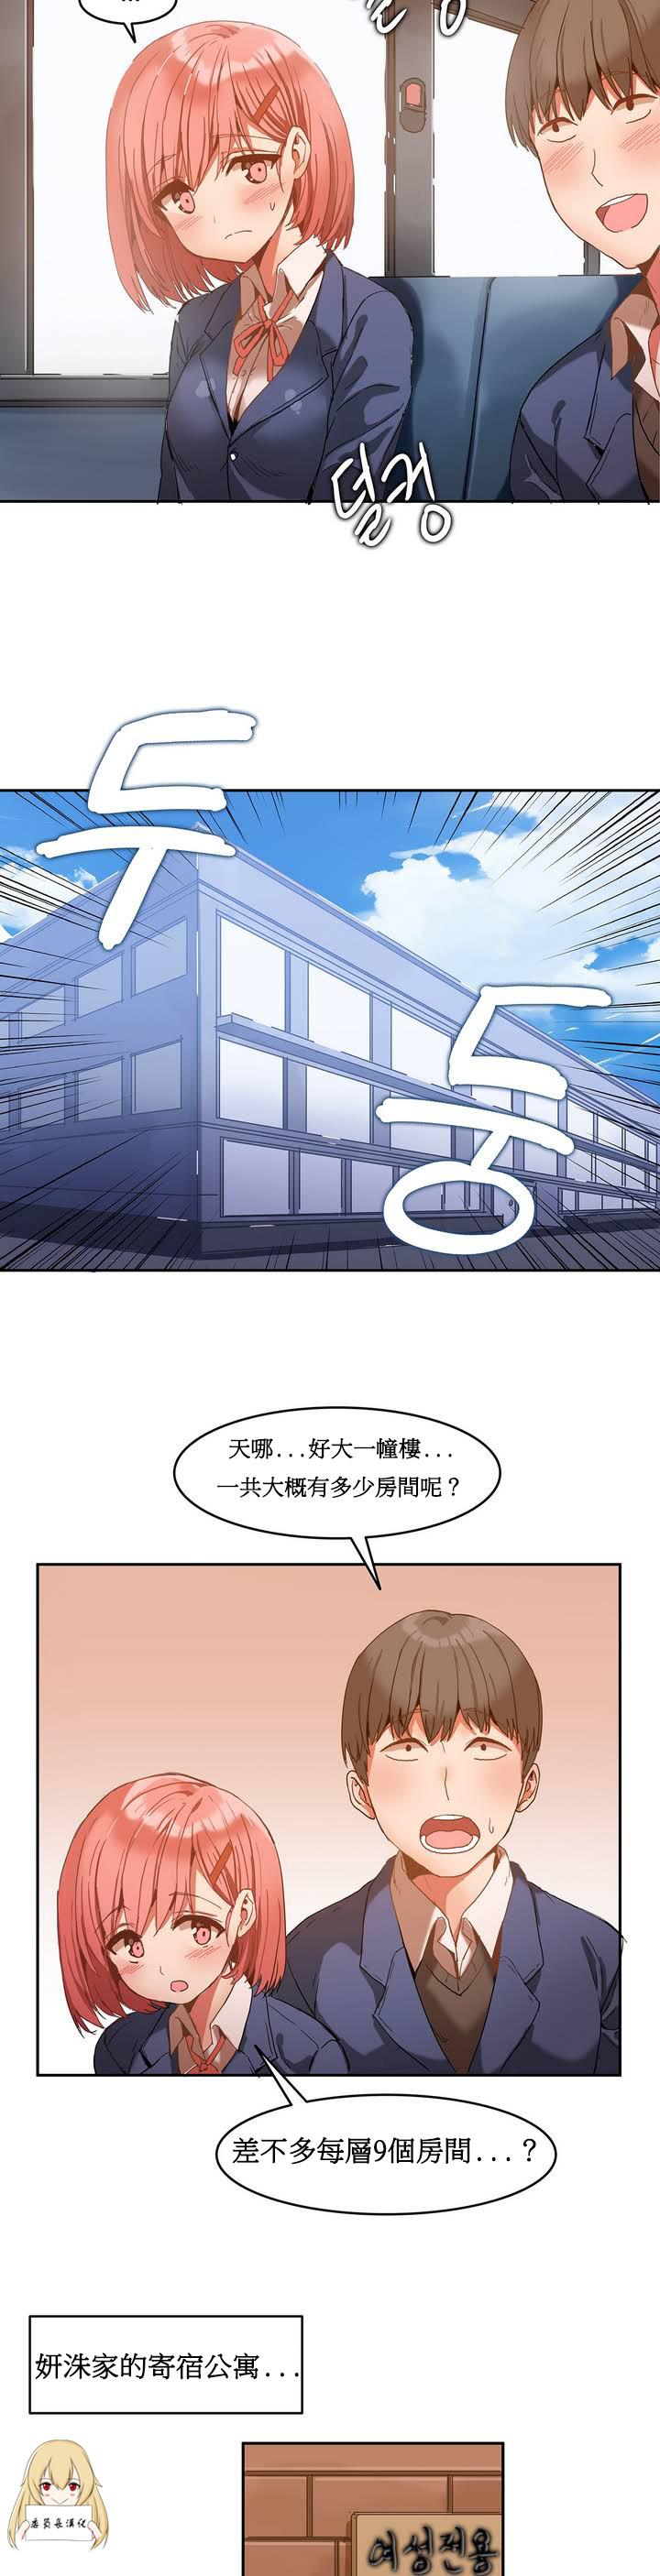 Amateur Porn Hahri's Lumpy Boardhouse Ch. 1~5【委員長個人漢化】（持續更新） Booty - Page 11